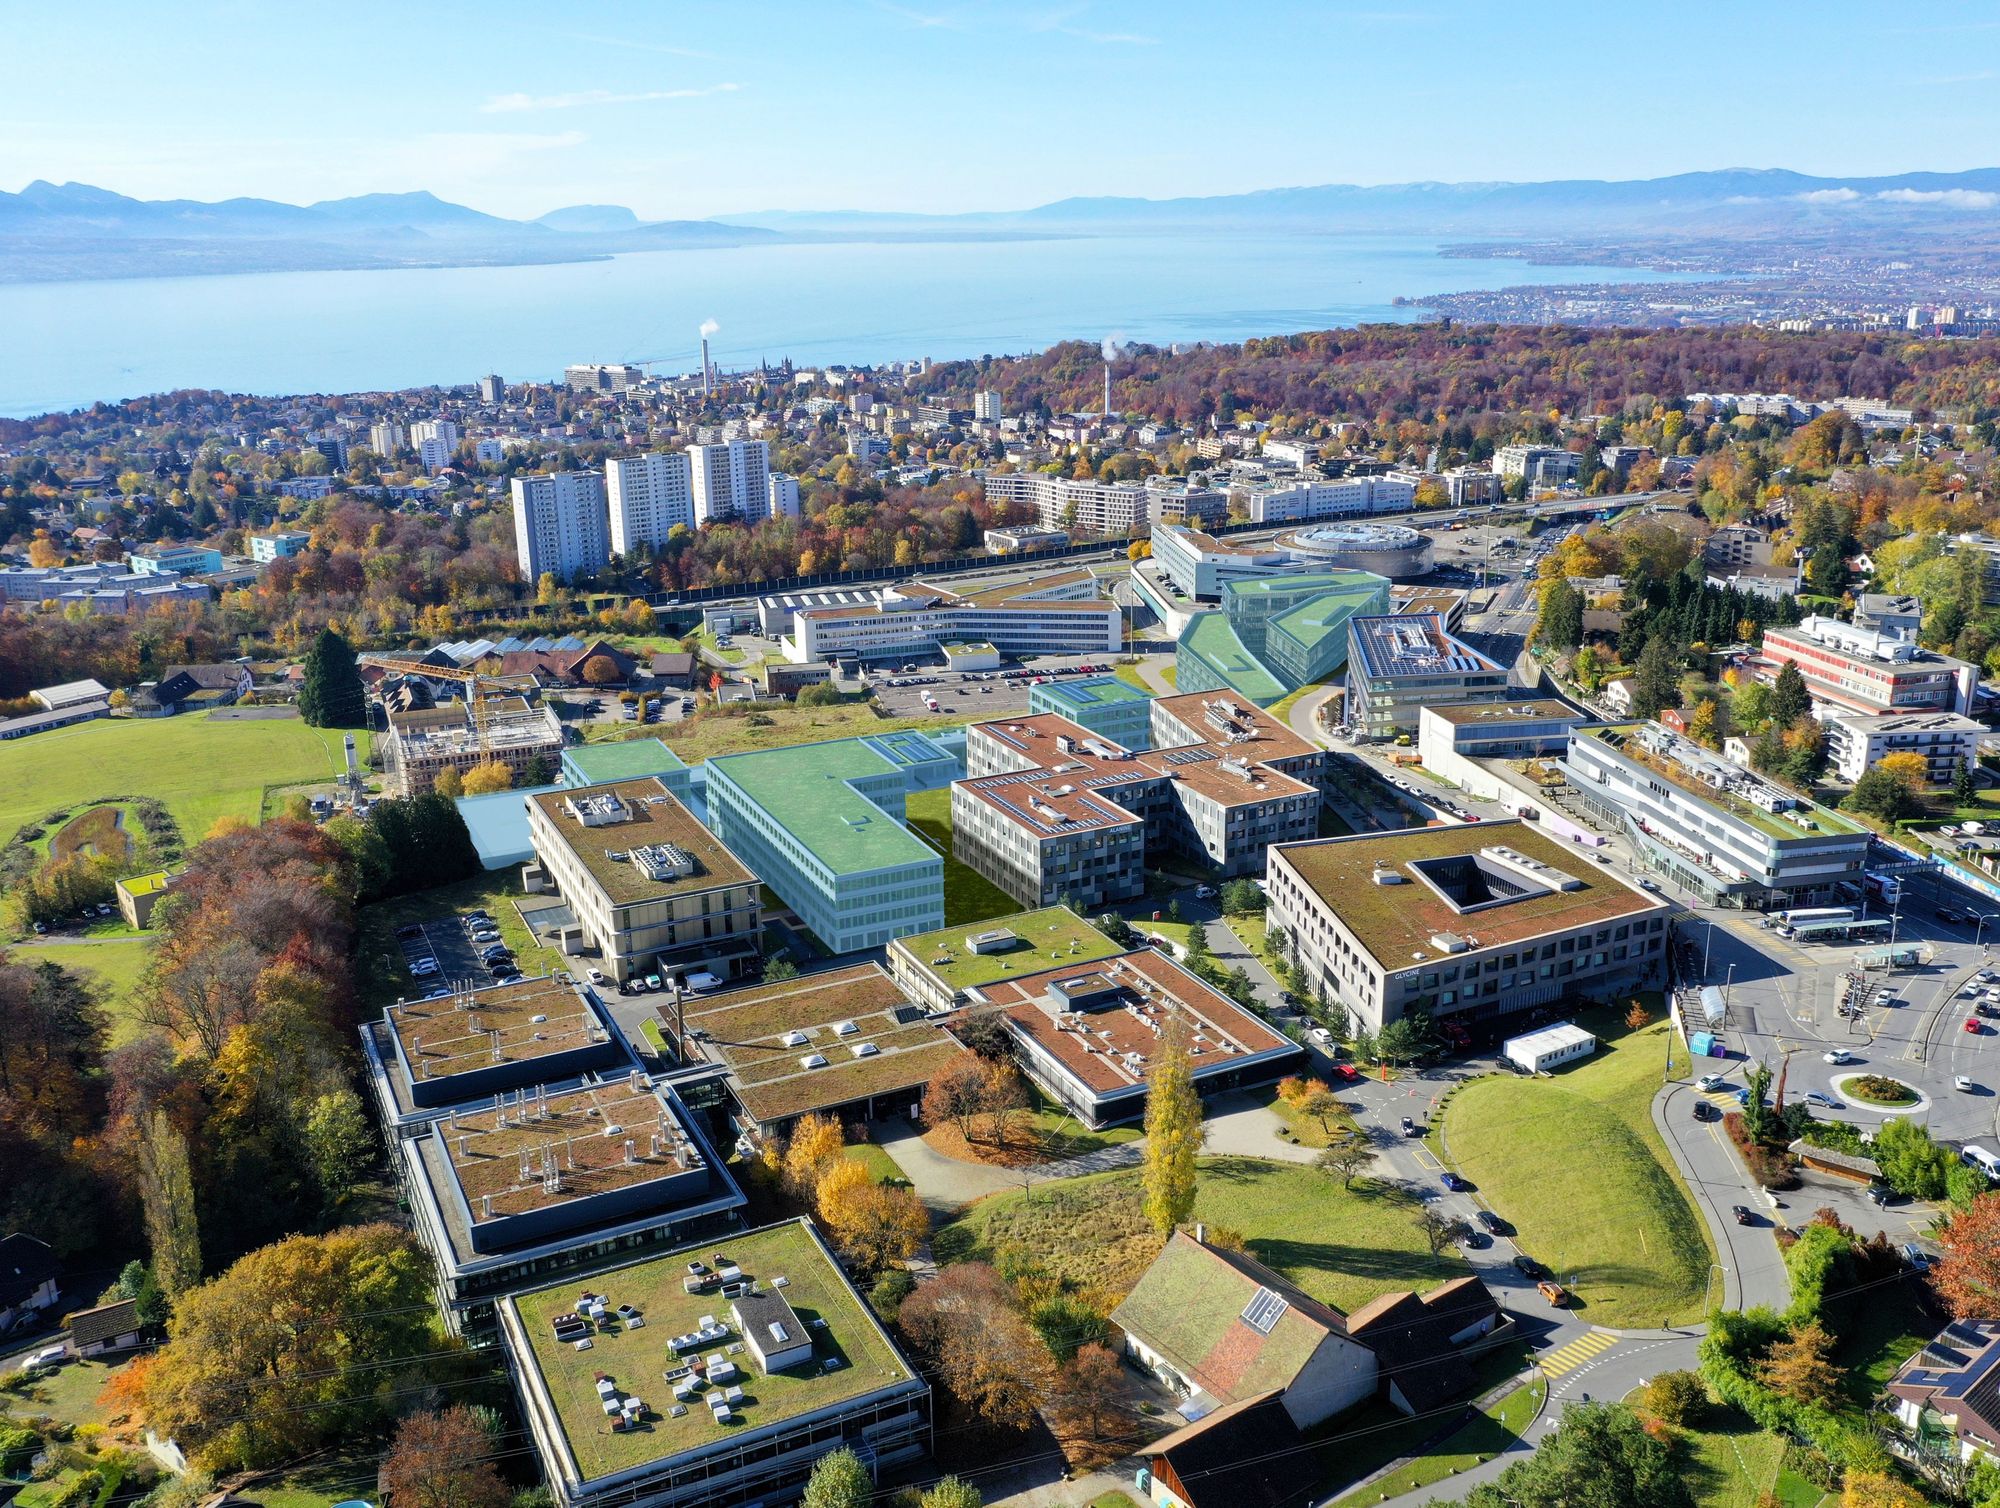 At the heart of the canton of Vaud, the Biopole Campus offers a stunning view on the lake and one of the most vibrant MedTech and BioTech ecosystem in the world.